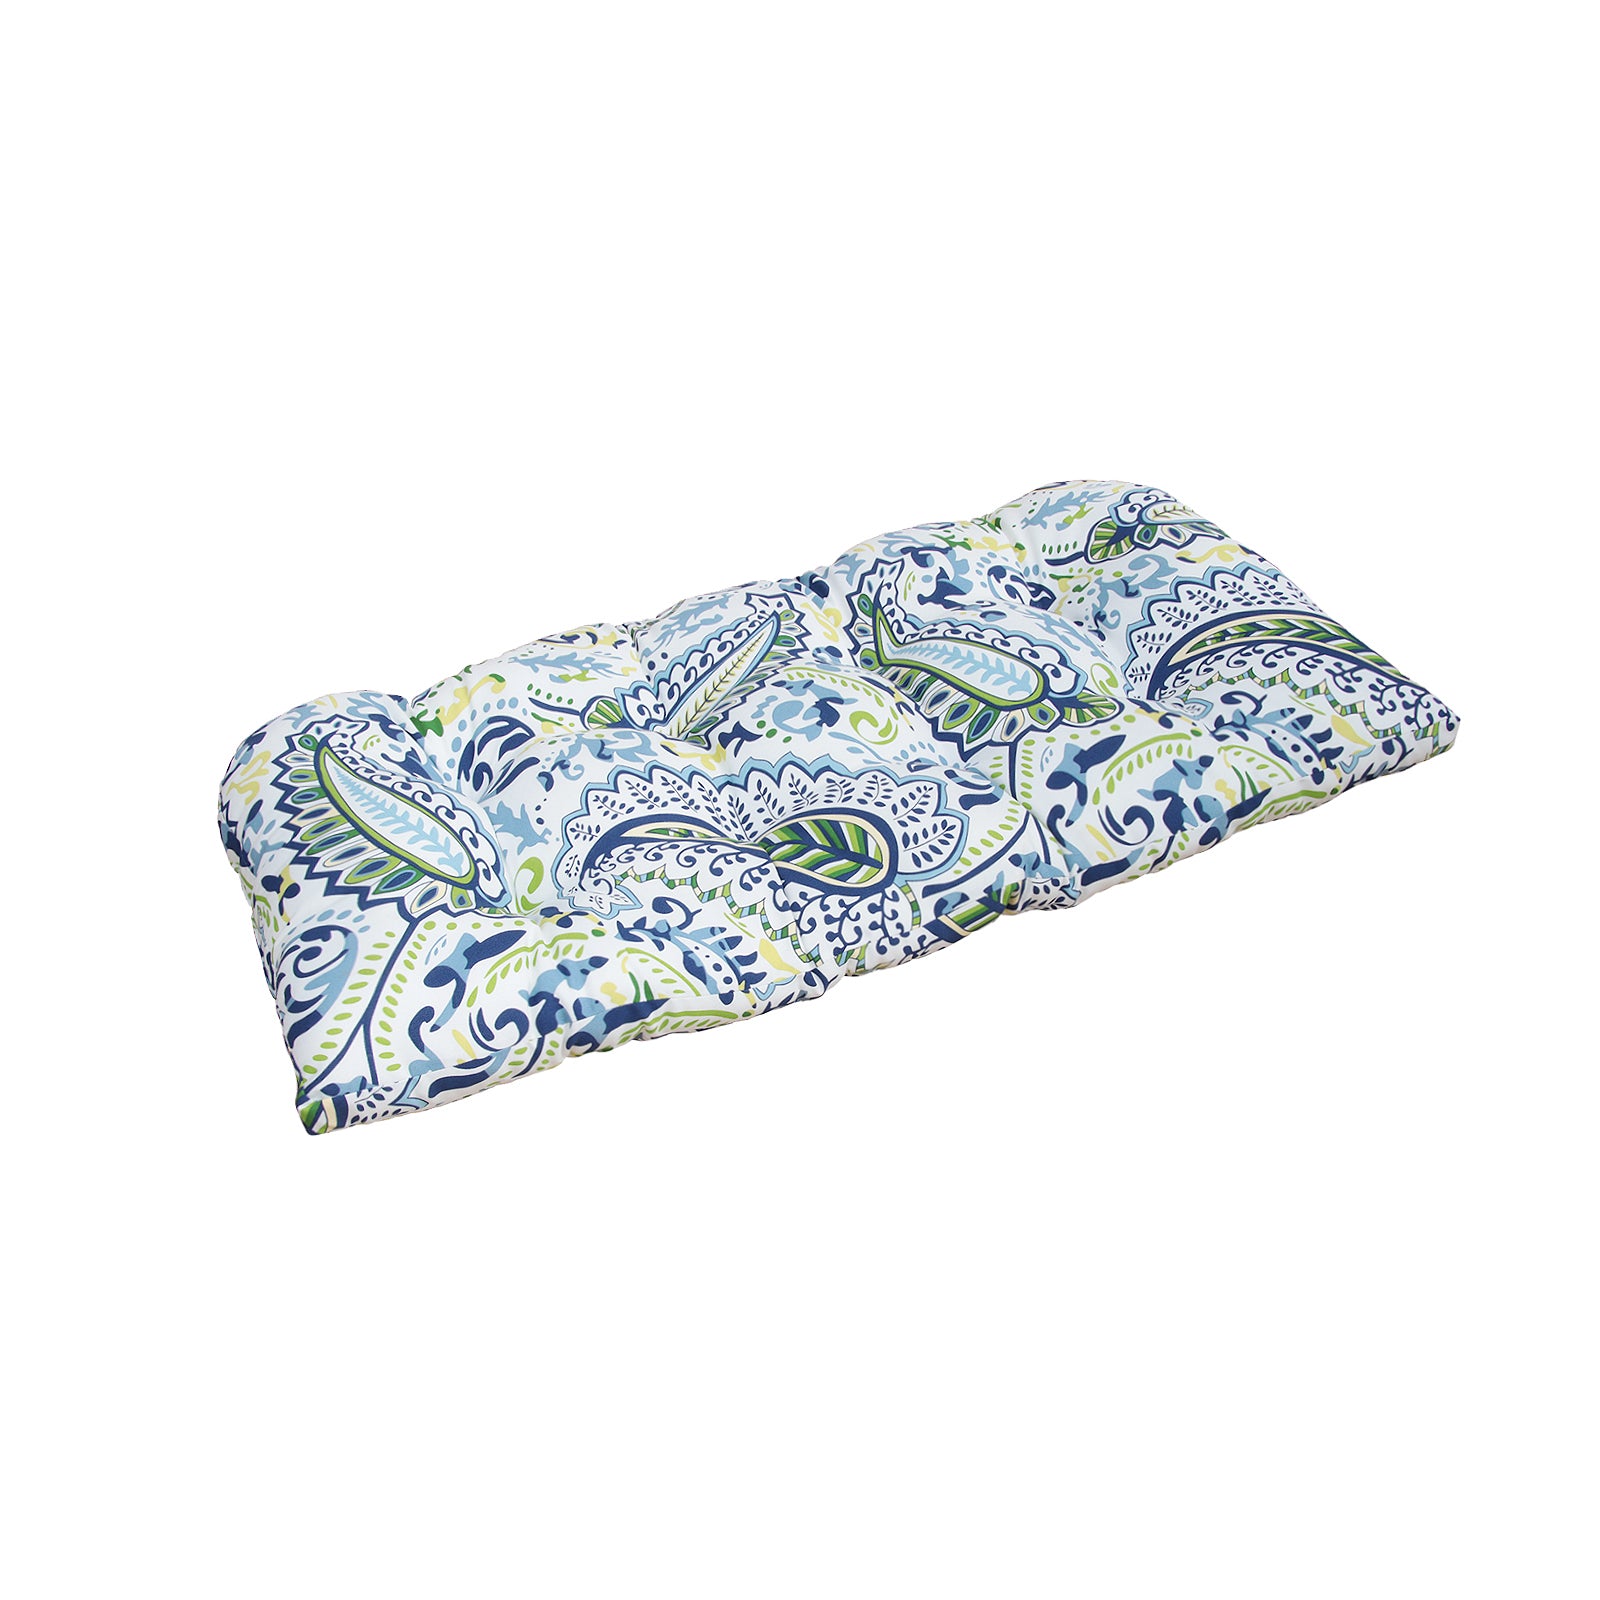 Indoor Outdoor Swing Bench Loveseat Cushion Tufted Patio Seating Cushions Green/Blue Paisley